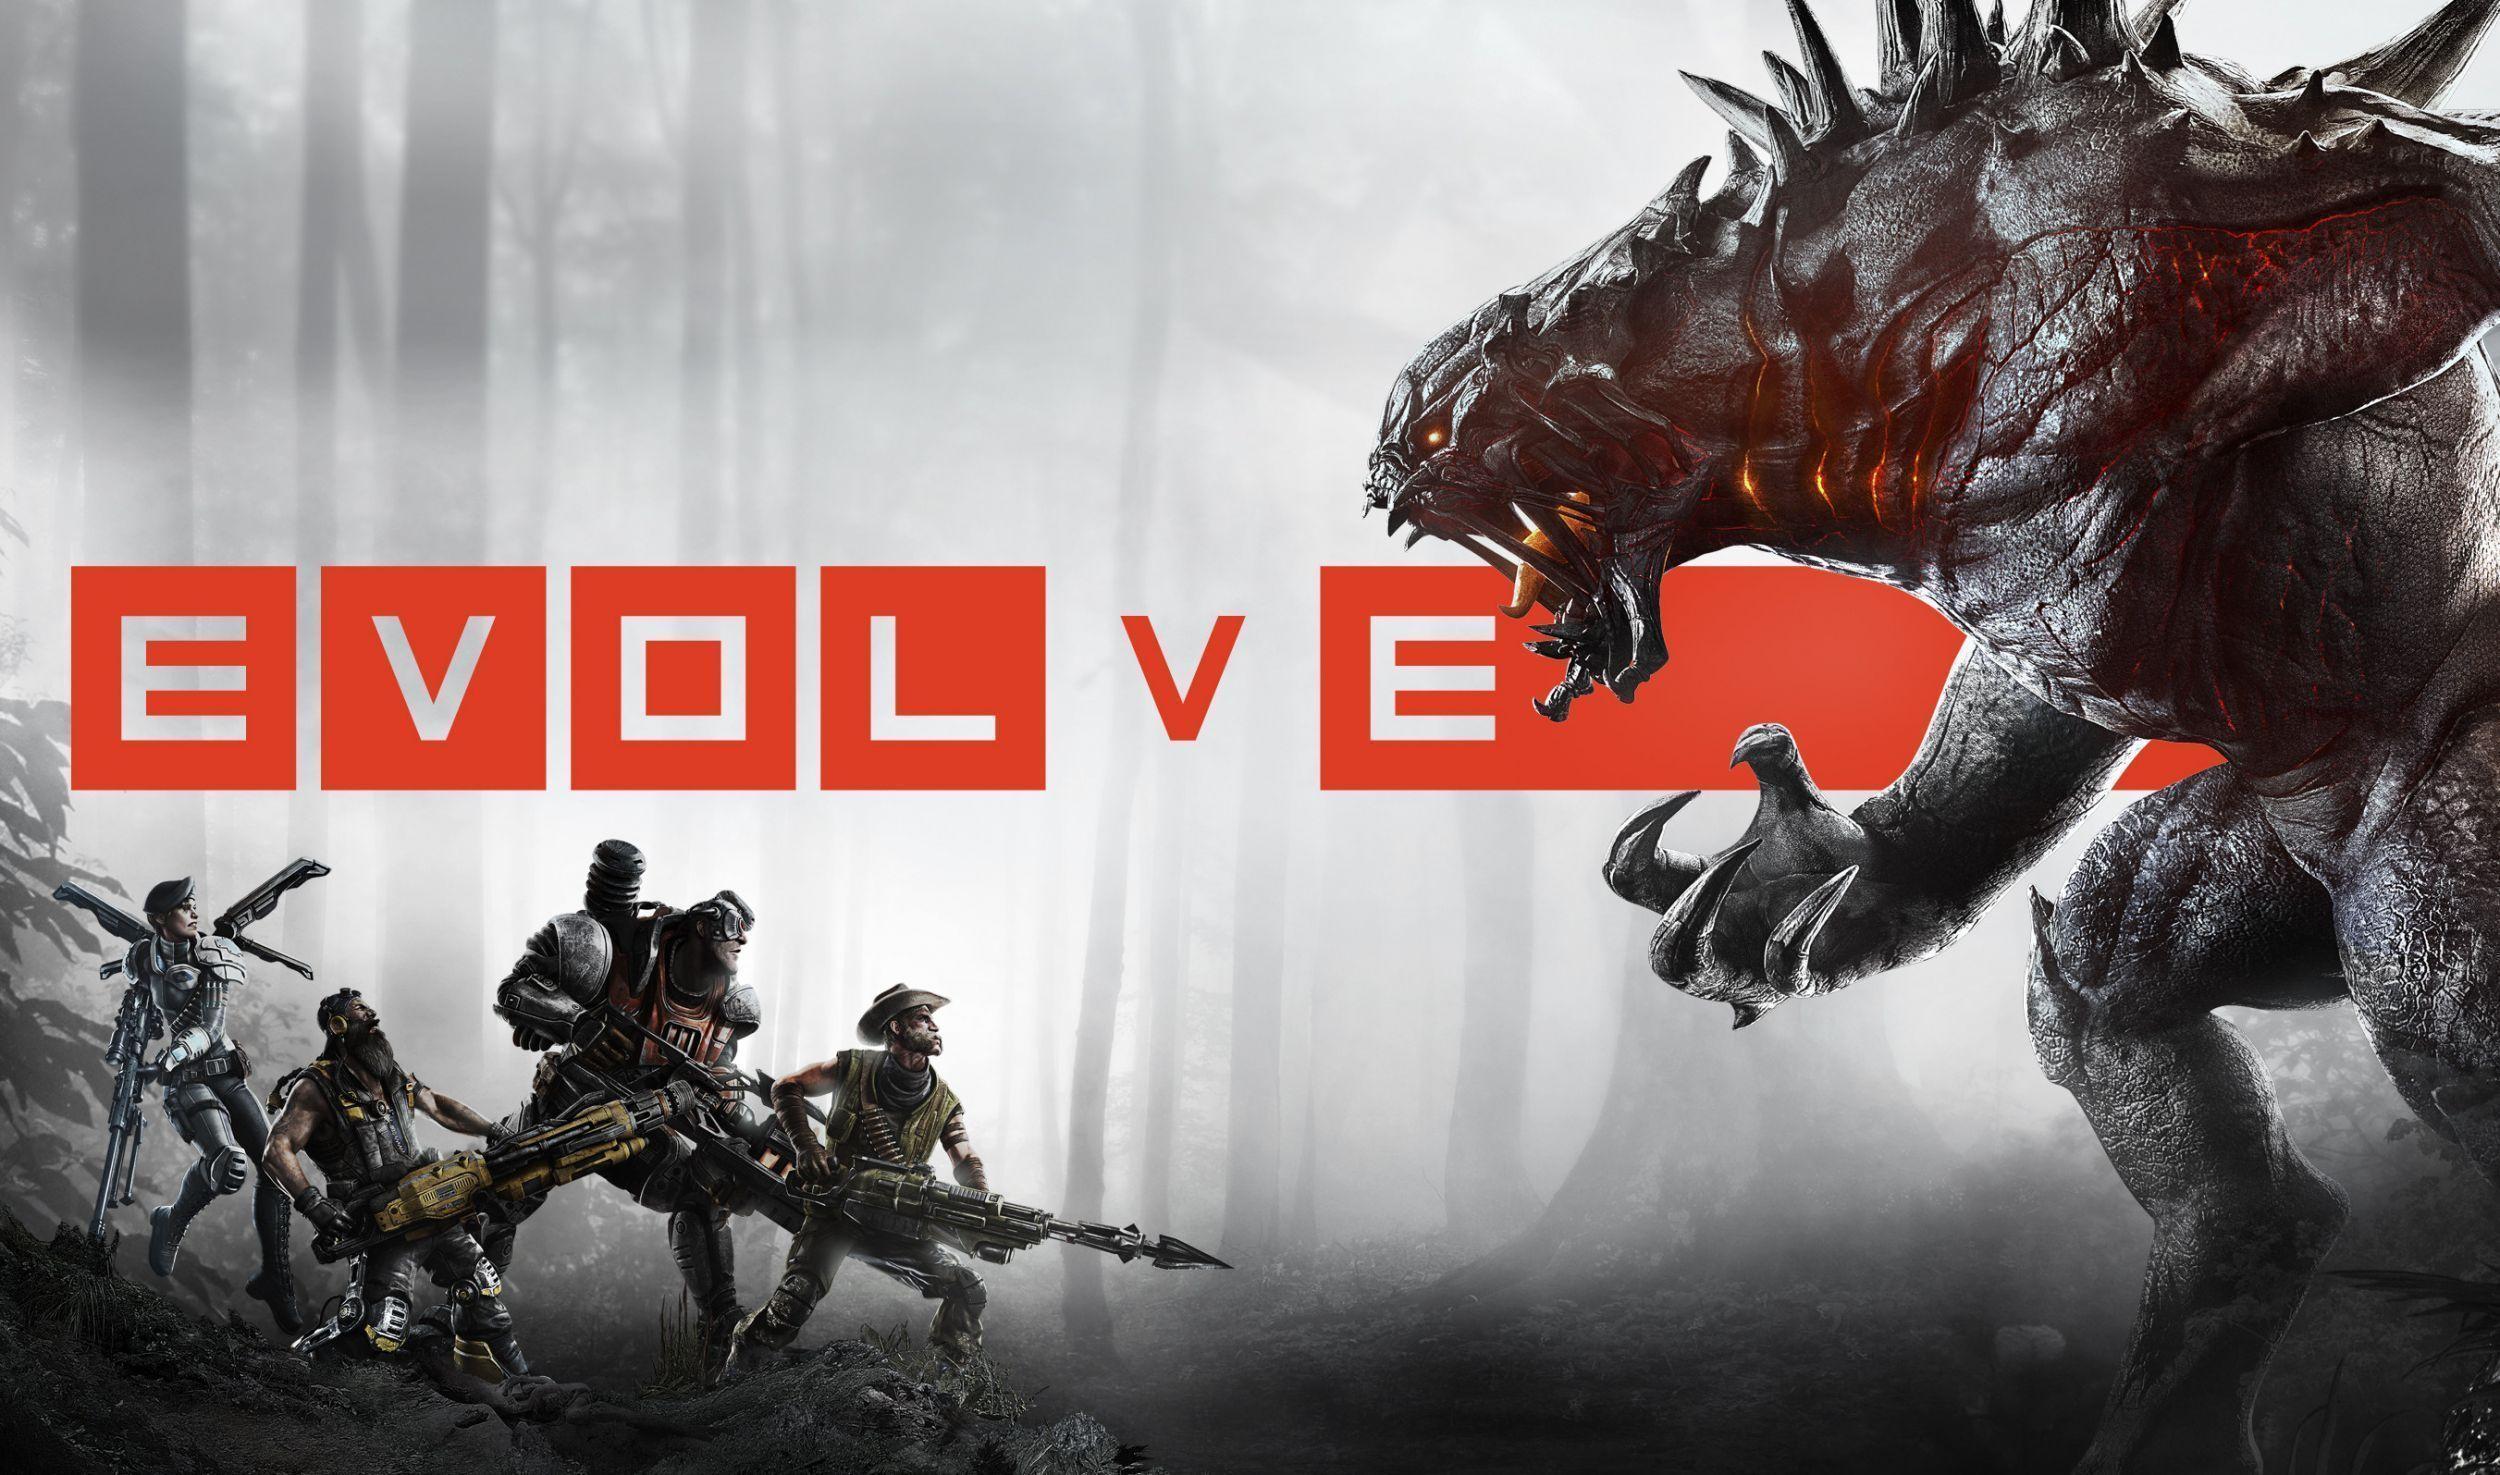 HD Evolve Wallpaper and Photo, 2703x1595